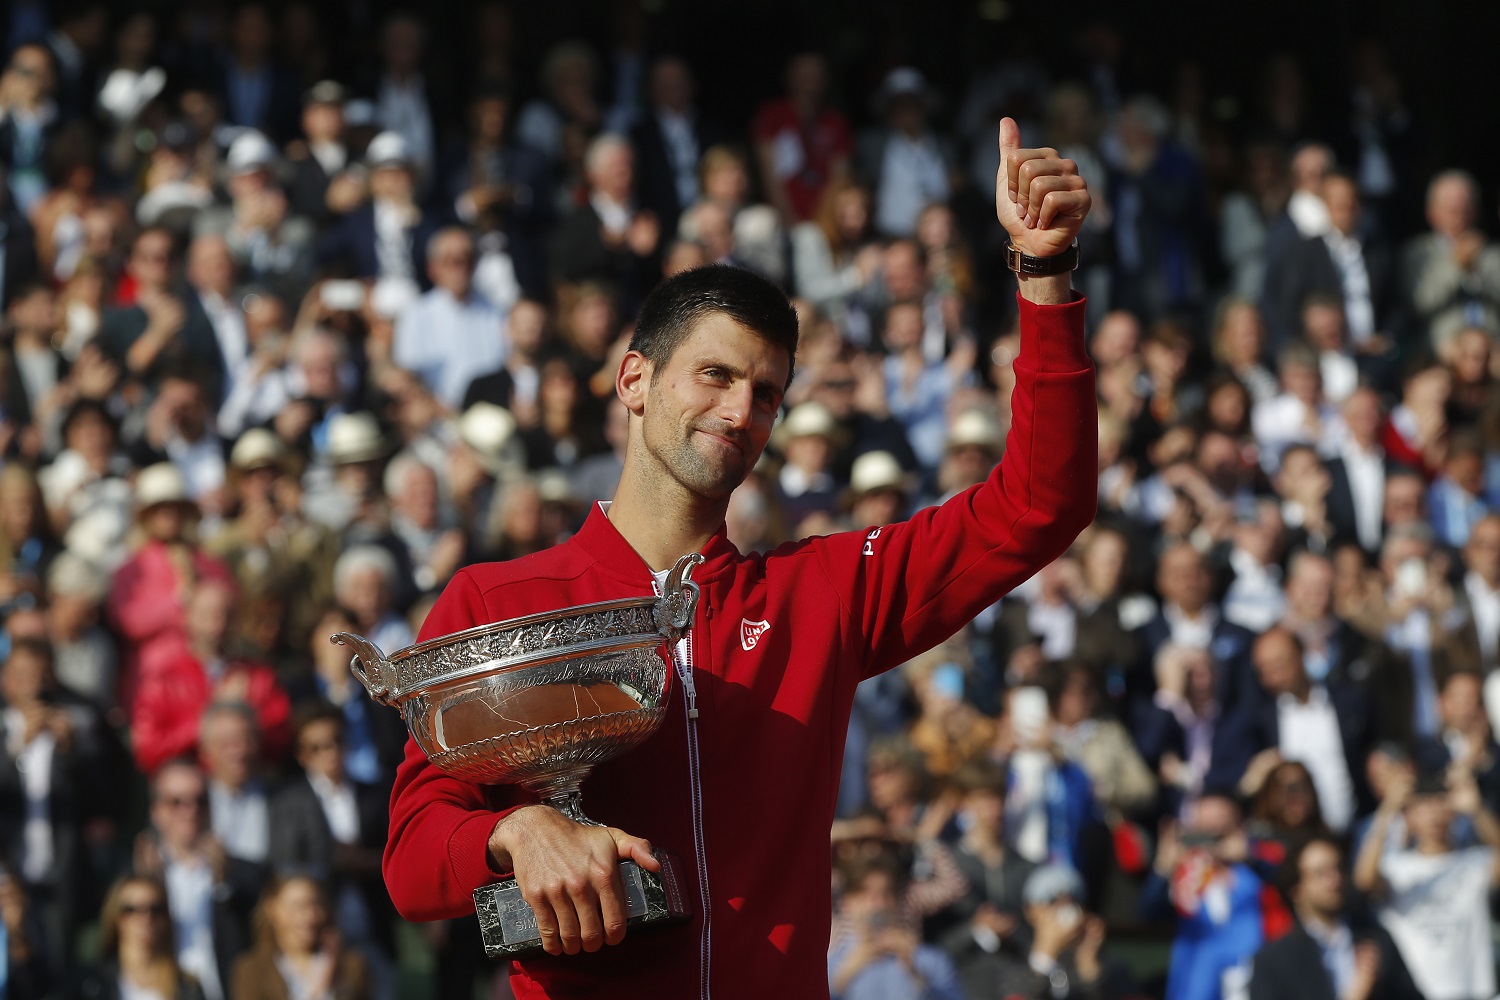 Serbia's Novak Djokovic gives a thumbs up as he holds the trophy after winning the final of the French Open tennis tournament against Britain's Andy Murray in four sets 3-6, 6-1, 6-2, 6-4, at the Roland Garros stadium in Paris, France, Sunday, June 5, 2016. (AP Photo/Michel Euler)